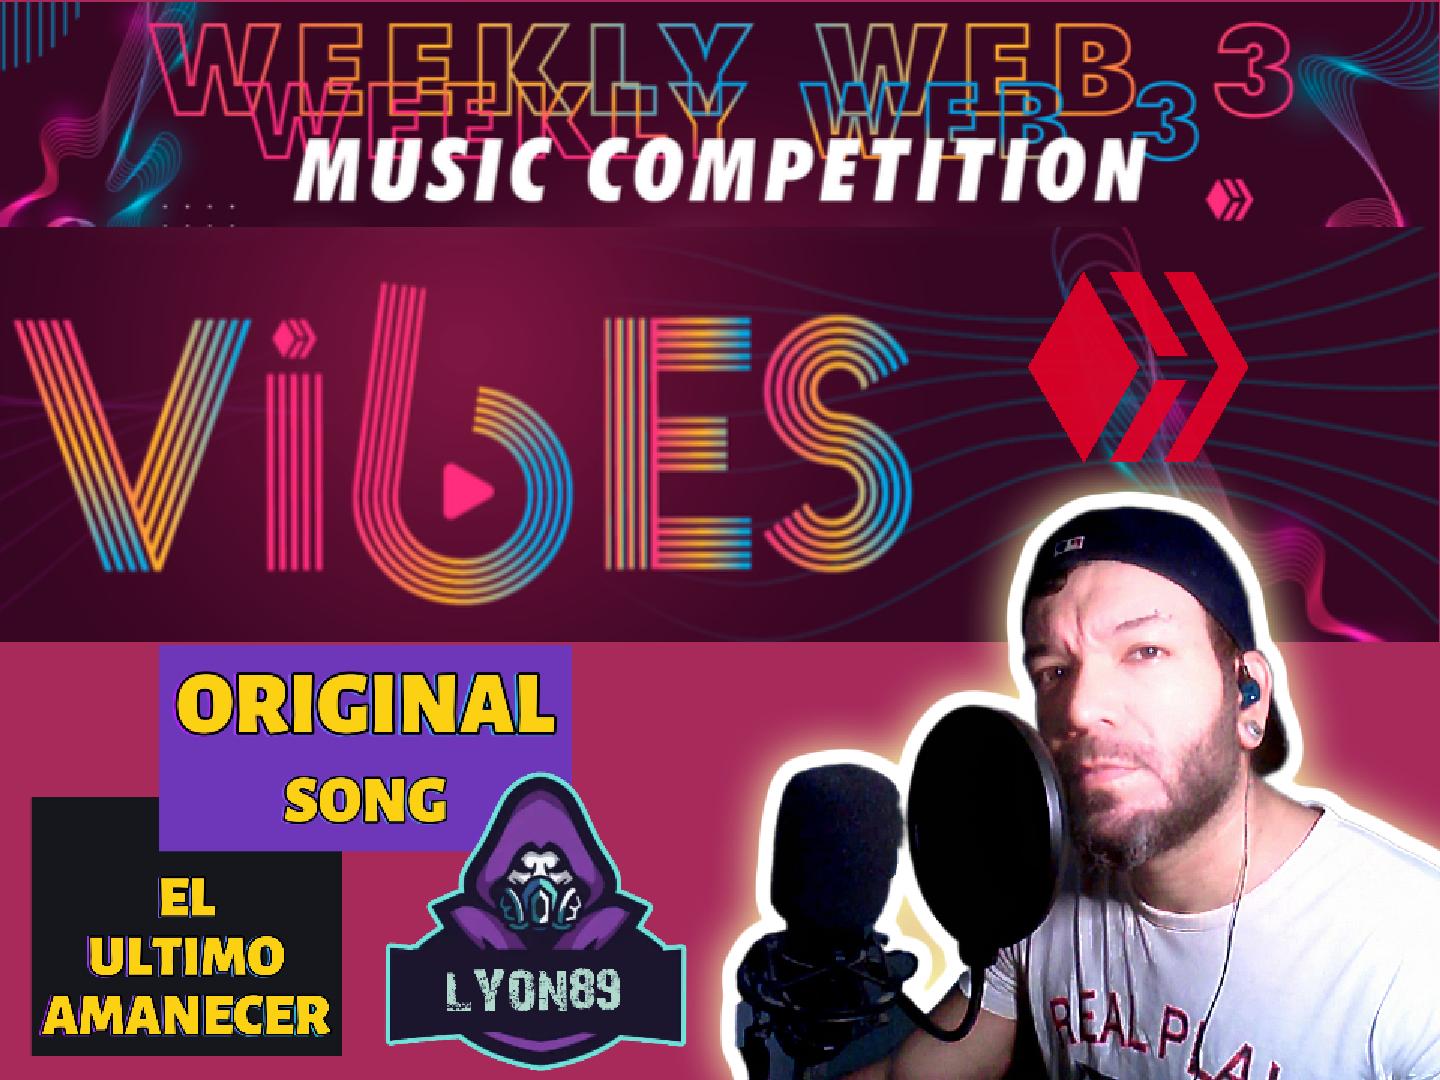 VIOBES WEB 3 MUSIC COMPETITION WEEK 9-Cover.jpg